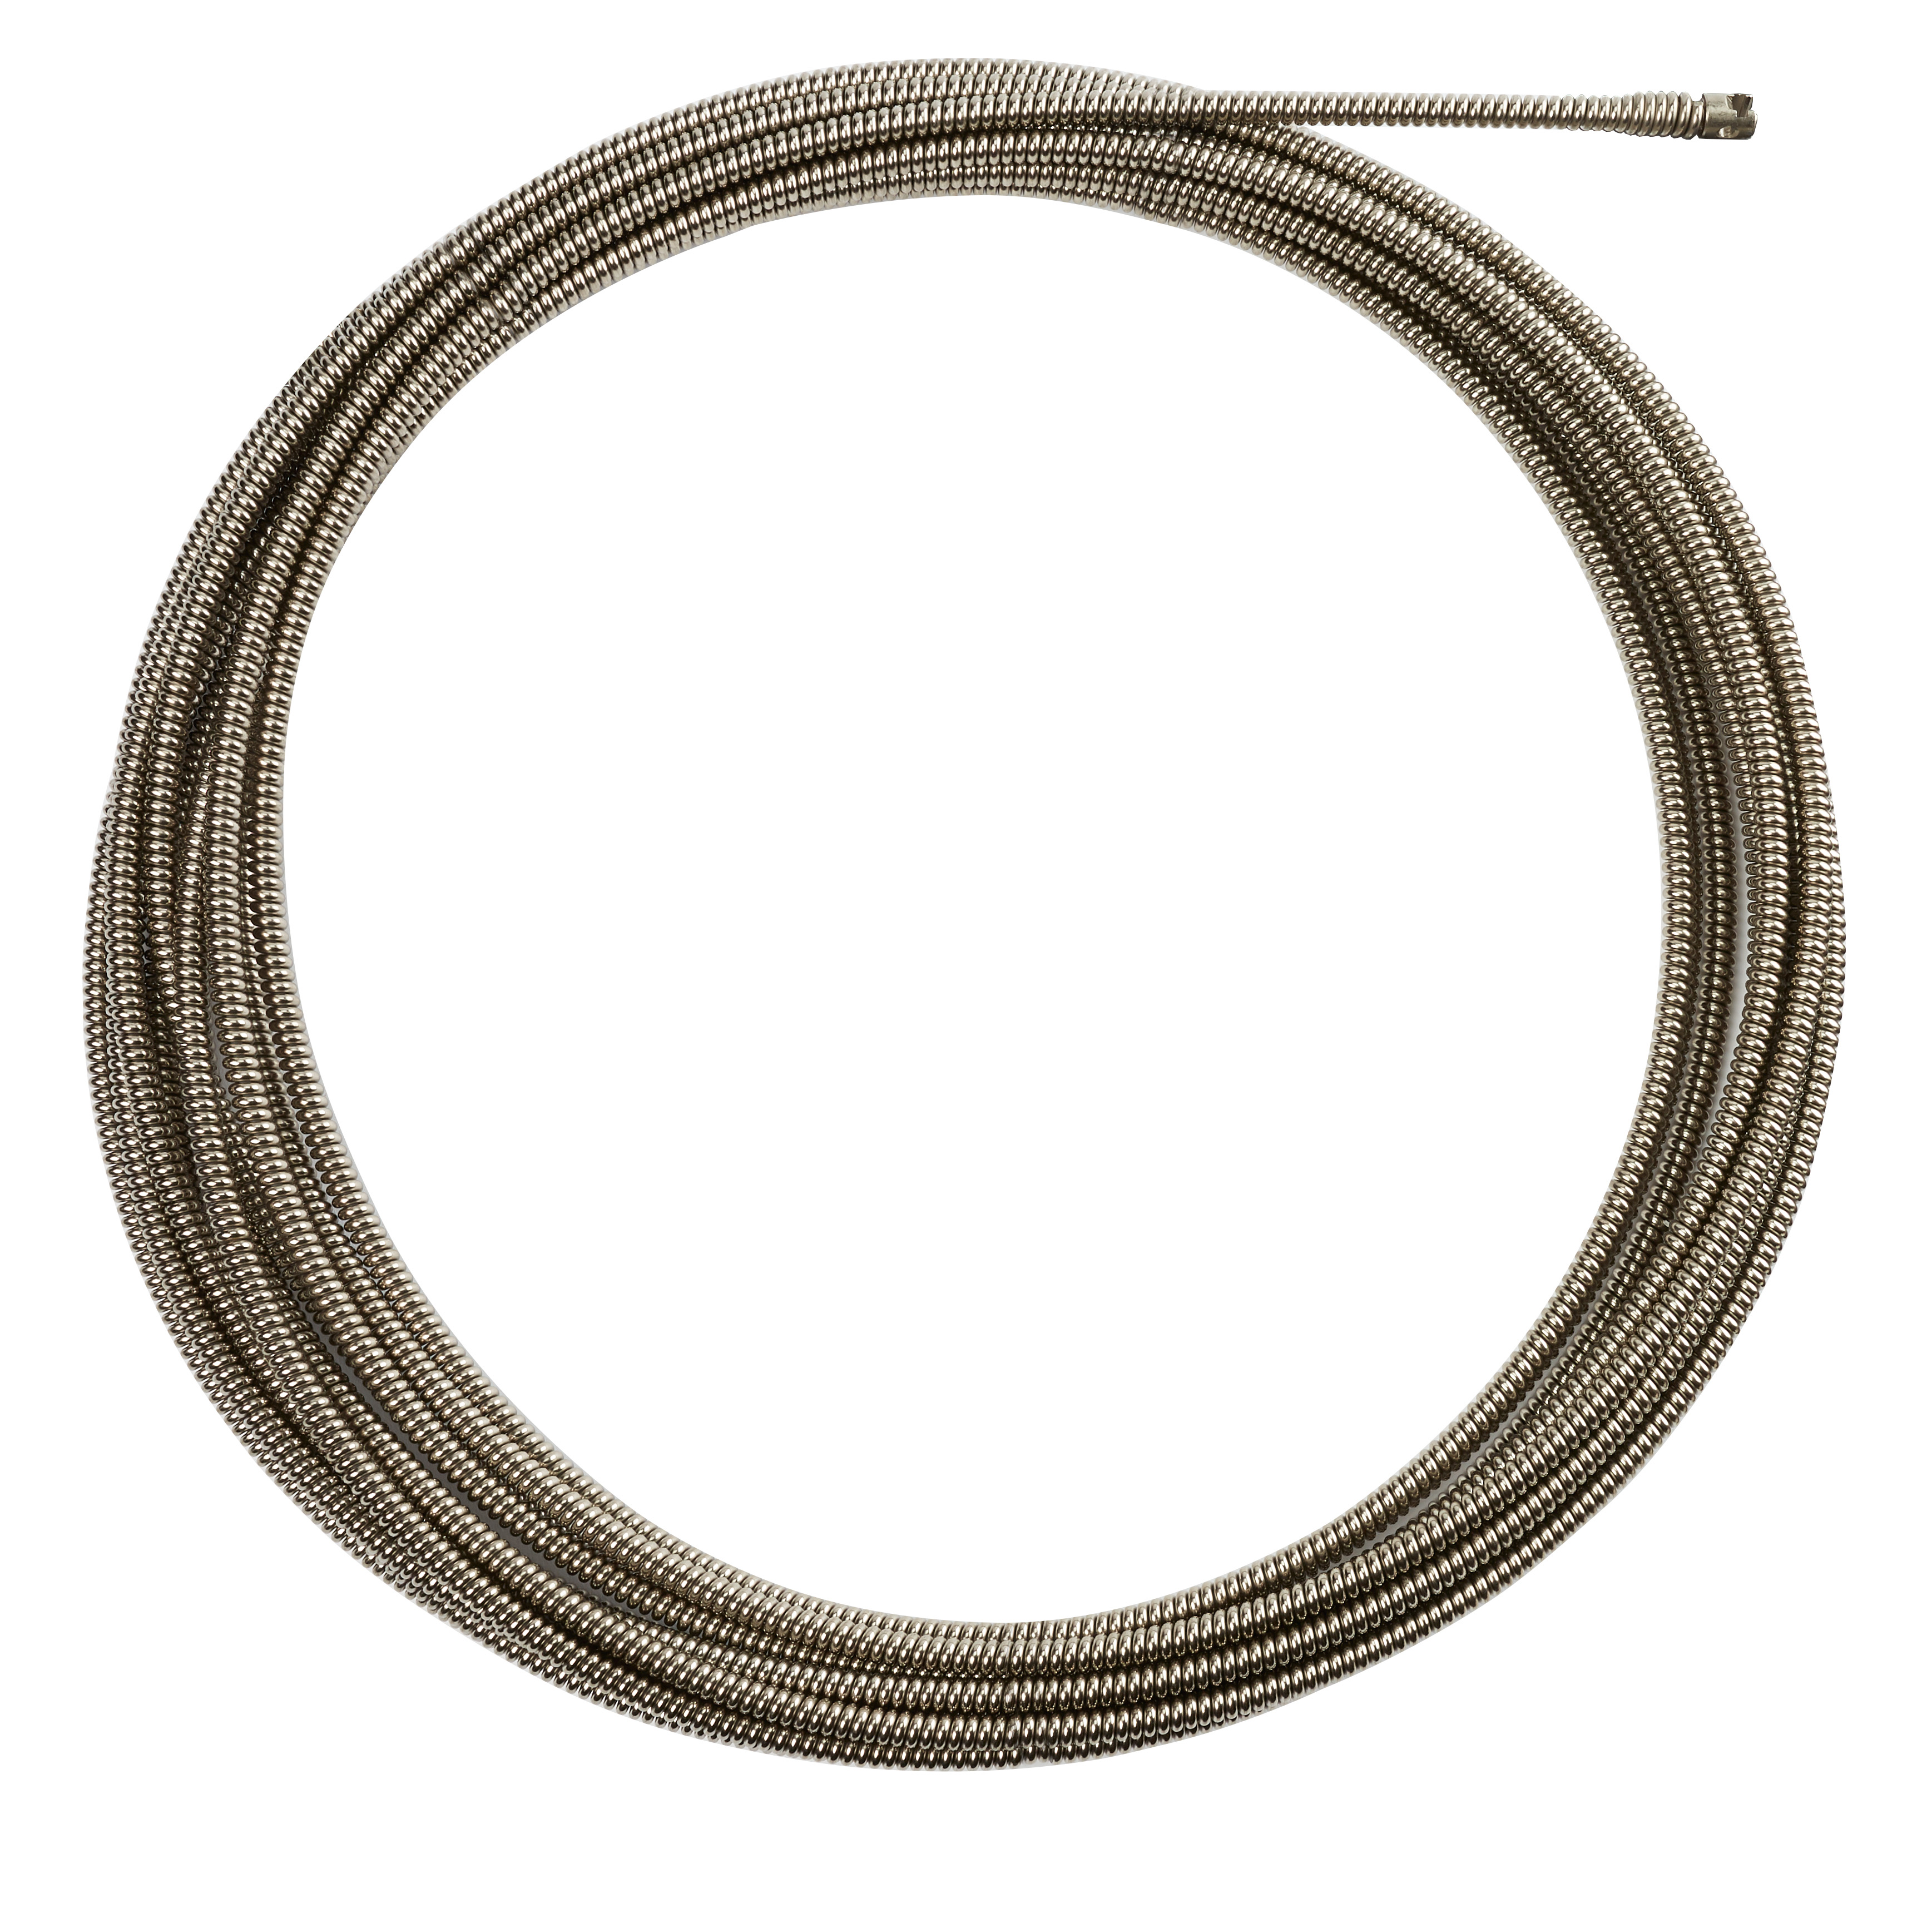 48-53-2773 045242513086 Milwaukee® Drain cables with rust guard™ set a new standard in the market for rust protection, maneuverability, and durability delivering up to 3X longer life. Traditional cables will oxidize, causing fragments of steel to erode off the cable, damaging the structural integrity. Through a proprietary plating process, rust guard™ plating delivers 20X more rust resistance, protecting against metal fatigue. A unique cable wind geometry provides stronger pull force and sustains shape. The smallest diameter connecting point and a solid polymer core provide the best maneuverability through the entire cable. All Milwaukee® drain cables are compatible with Milwaukee® drain machines and other professional drain cleaning machines, and backed by a 2-year warranty from defect or breakage.